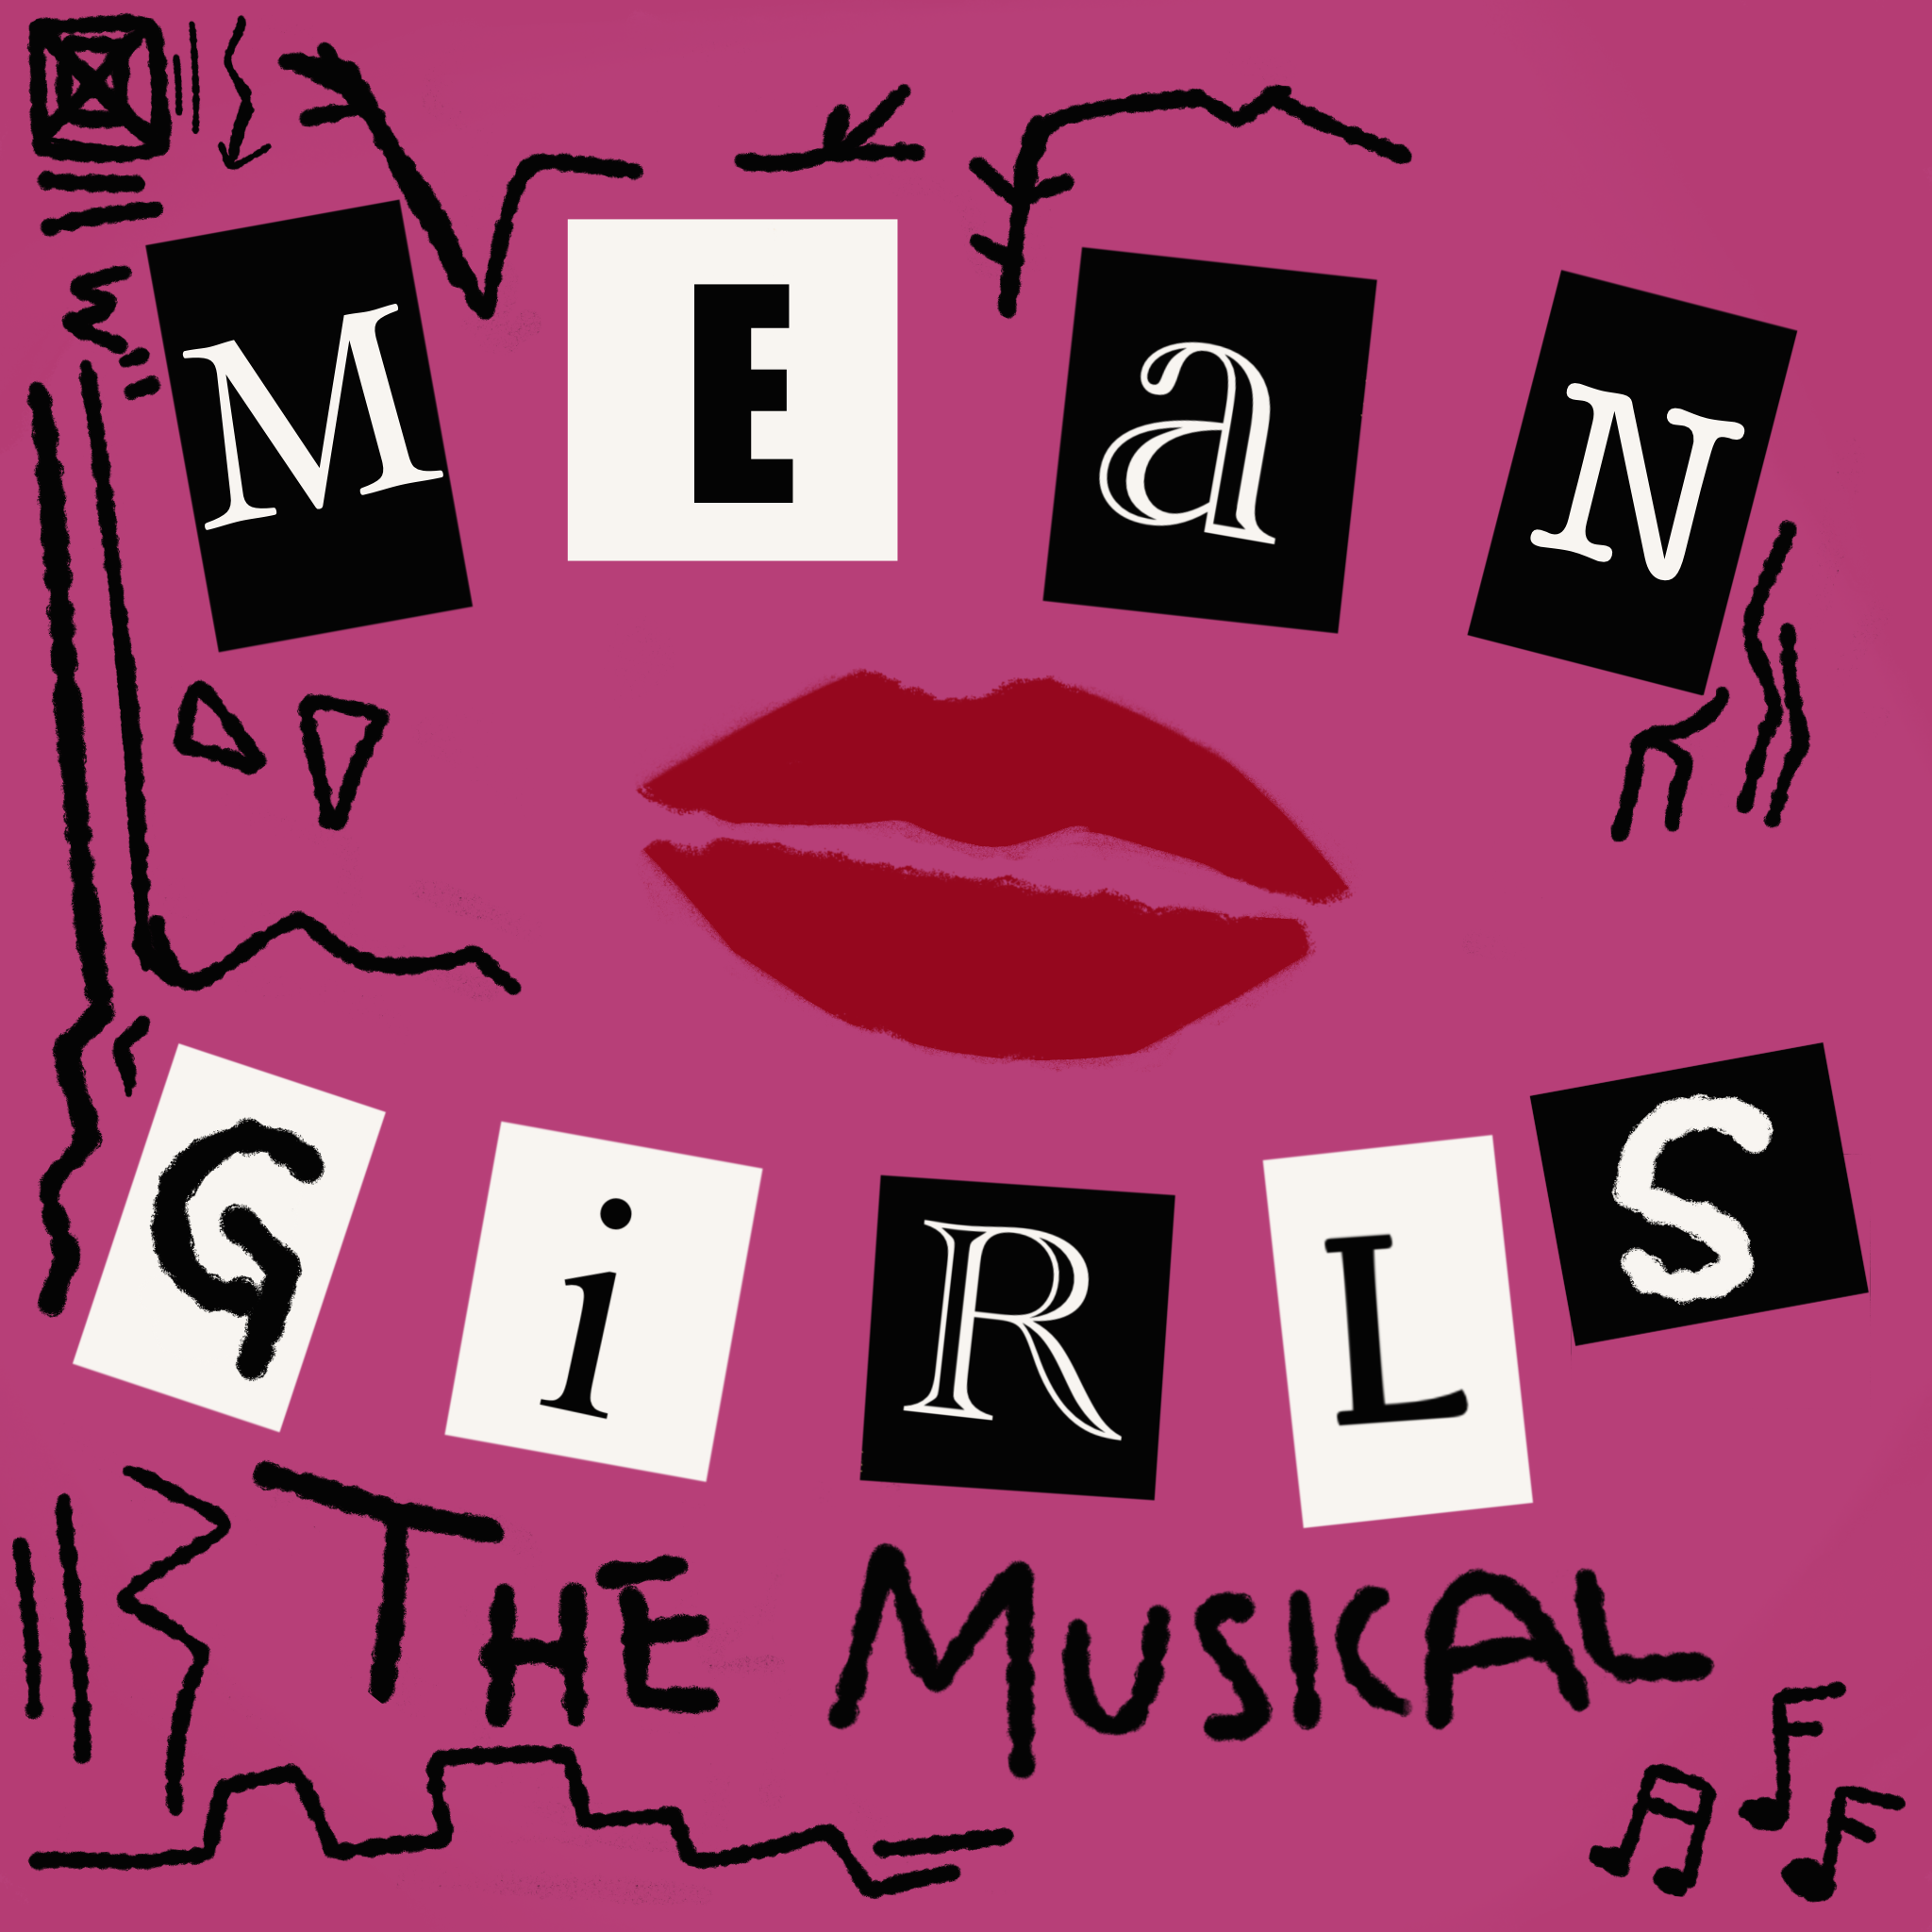 Mean Girls The Musical, an imitation of the original Broadway Mean Girls was released on Jan. 24, 2024. Featuring actors such as Renee Rap, Christopher Briney, and Angourie Rice, the musical made a gross income off $130.1 million worldwide.